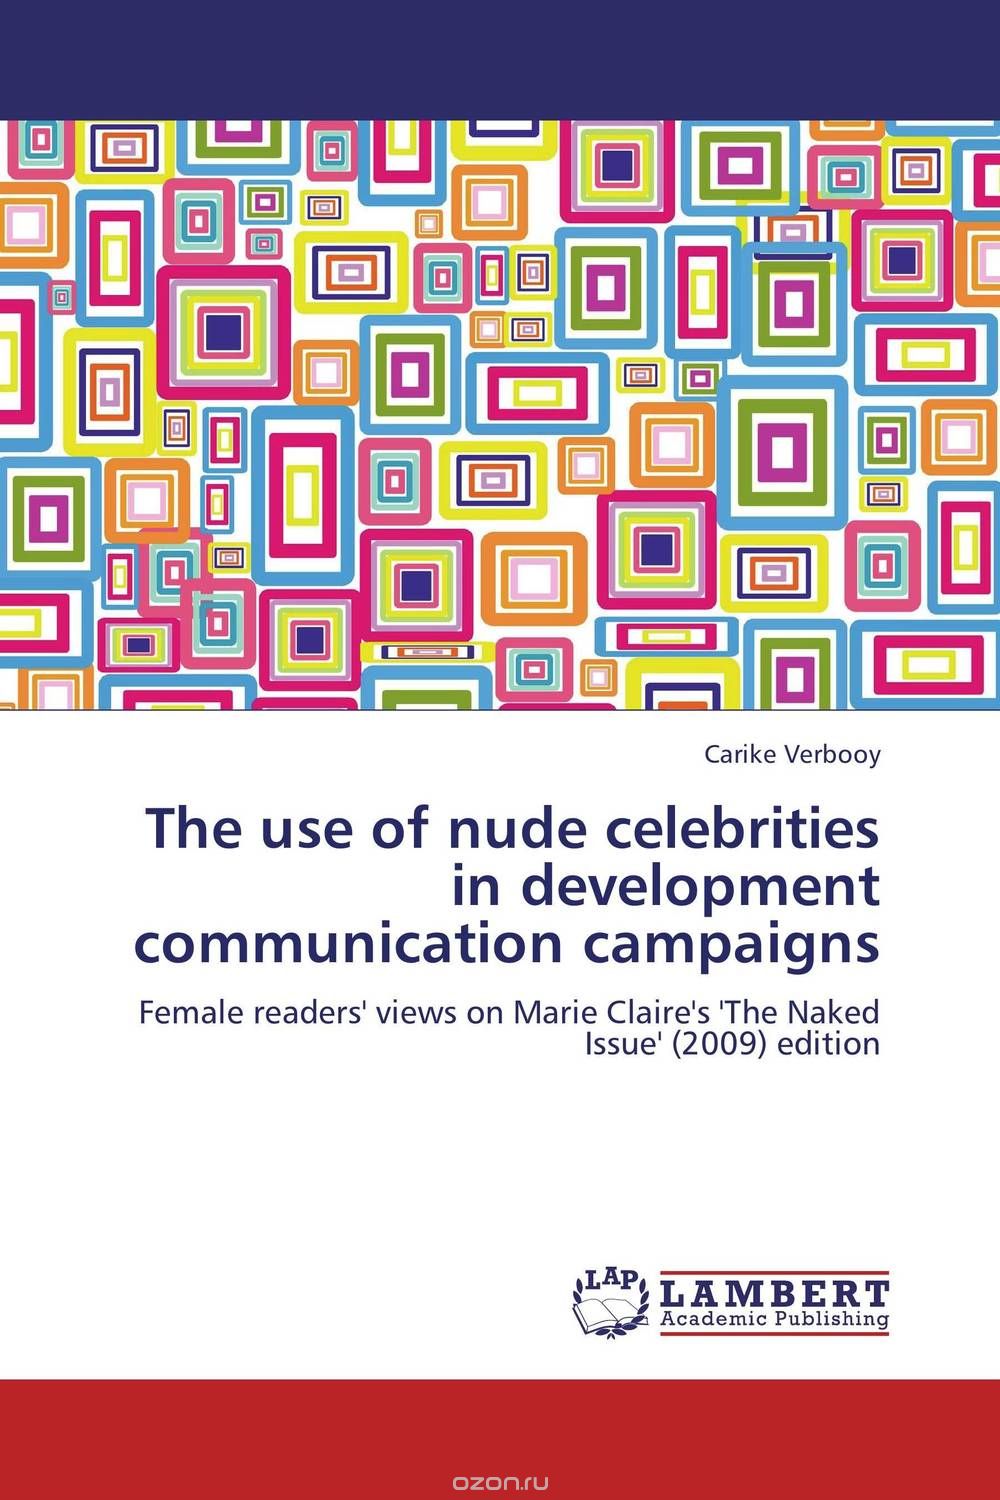 The use of nude celebrities in development communication campaigns